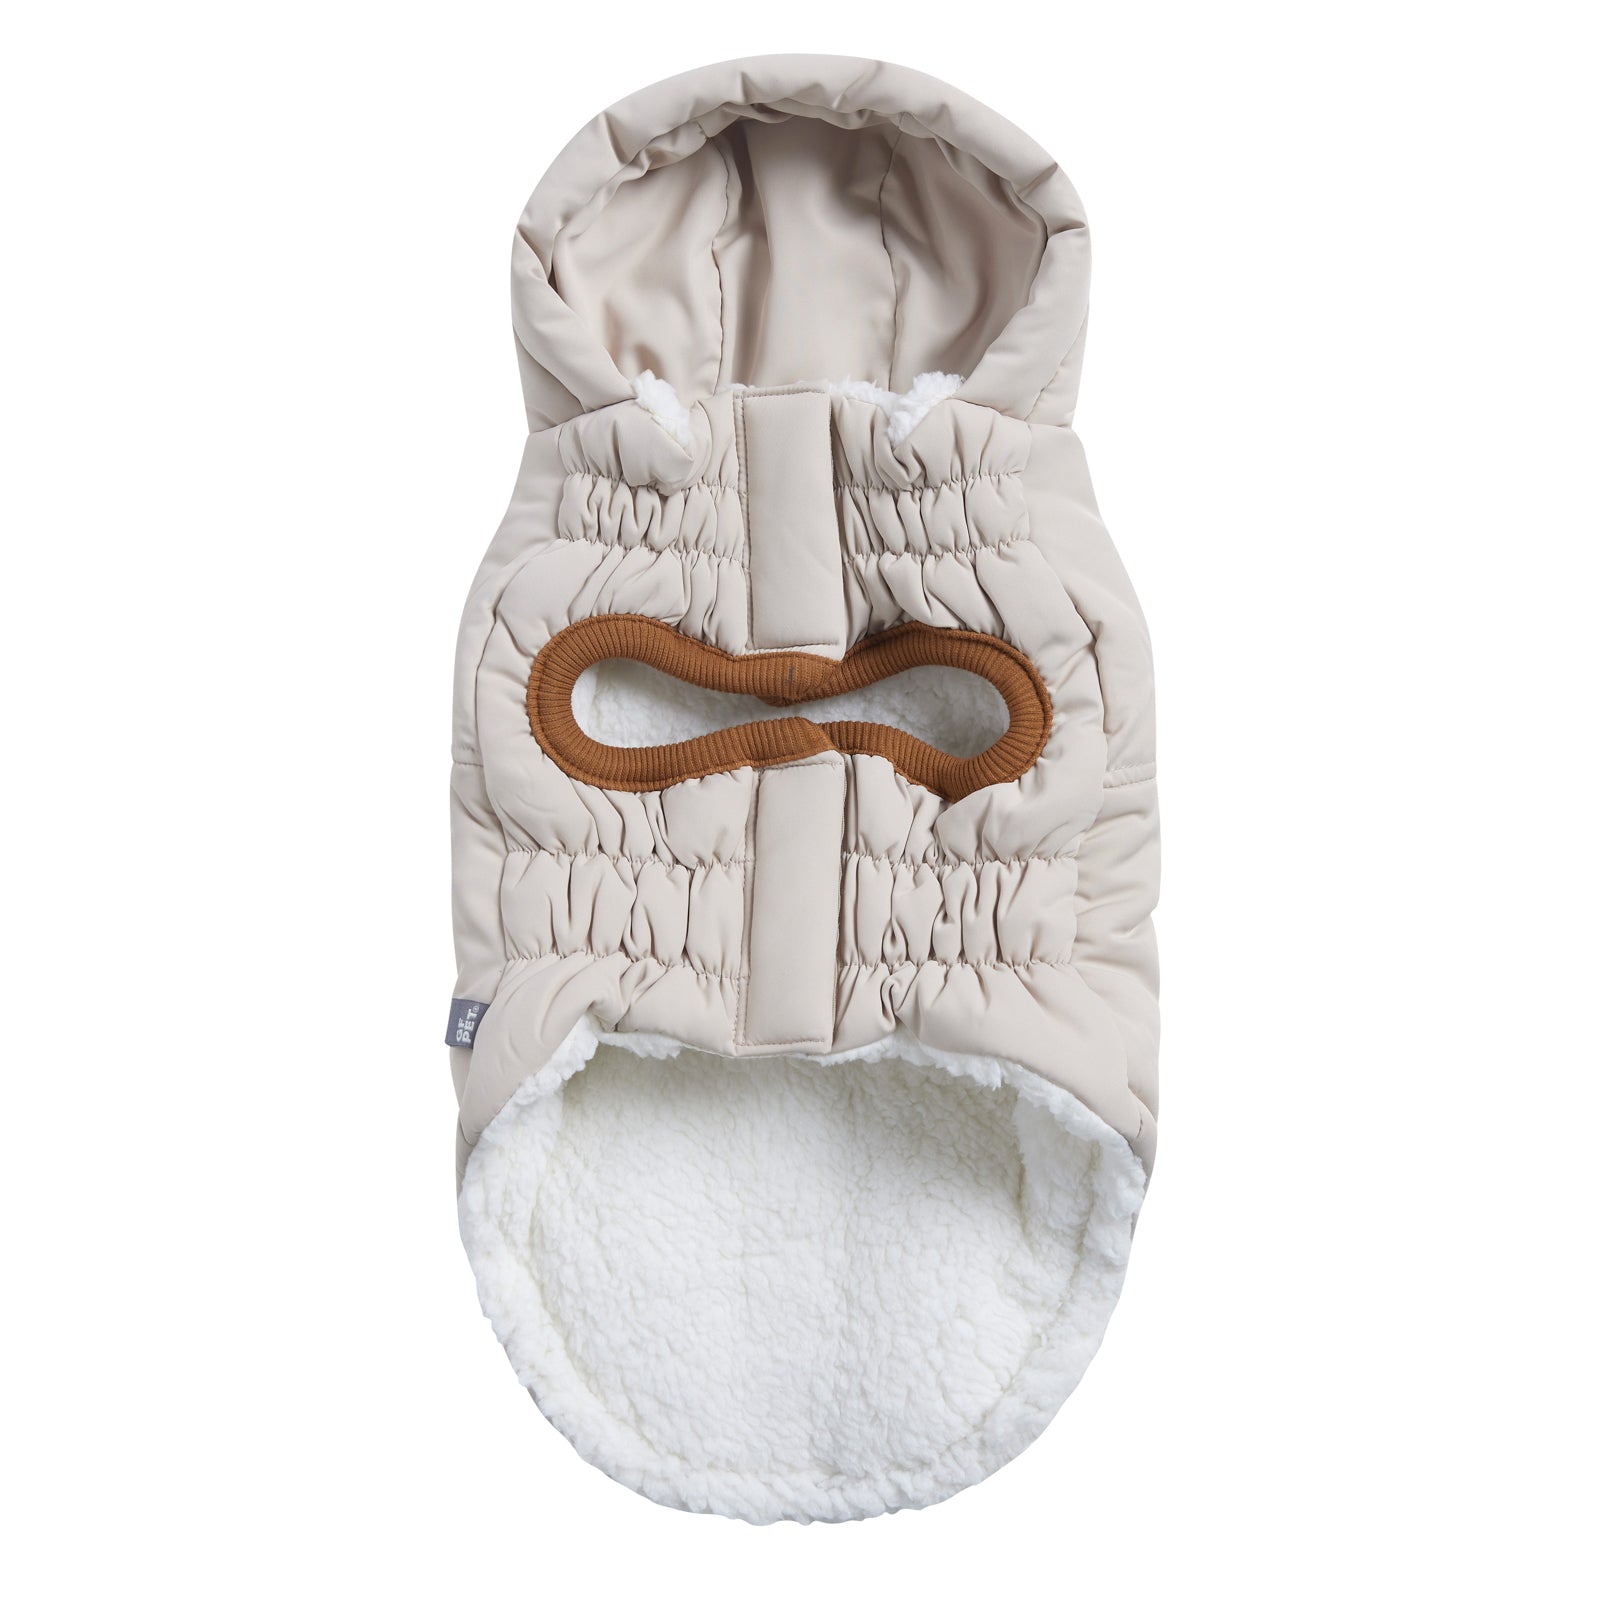 the underside of an off white hooded parka for dogs